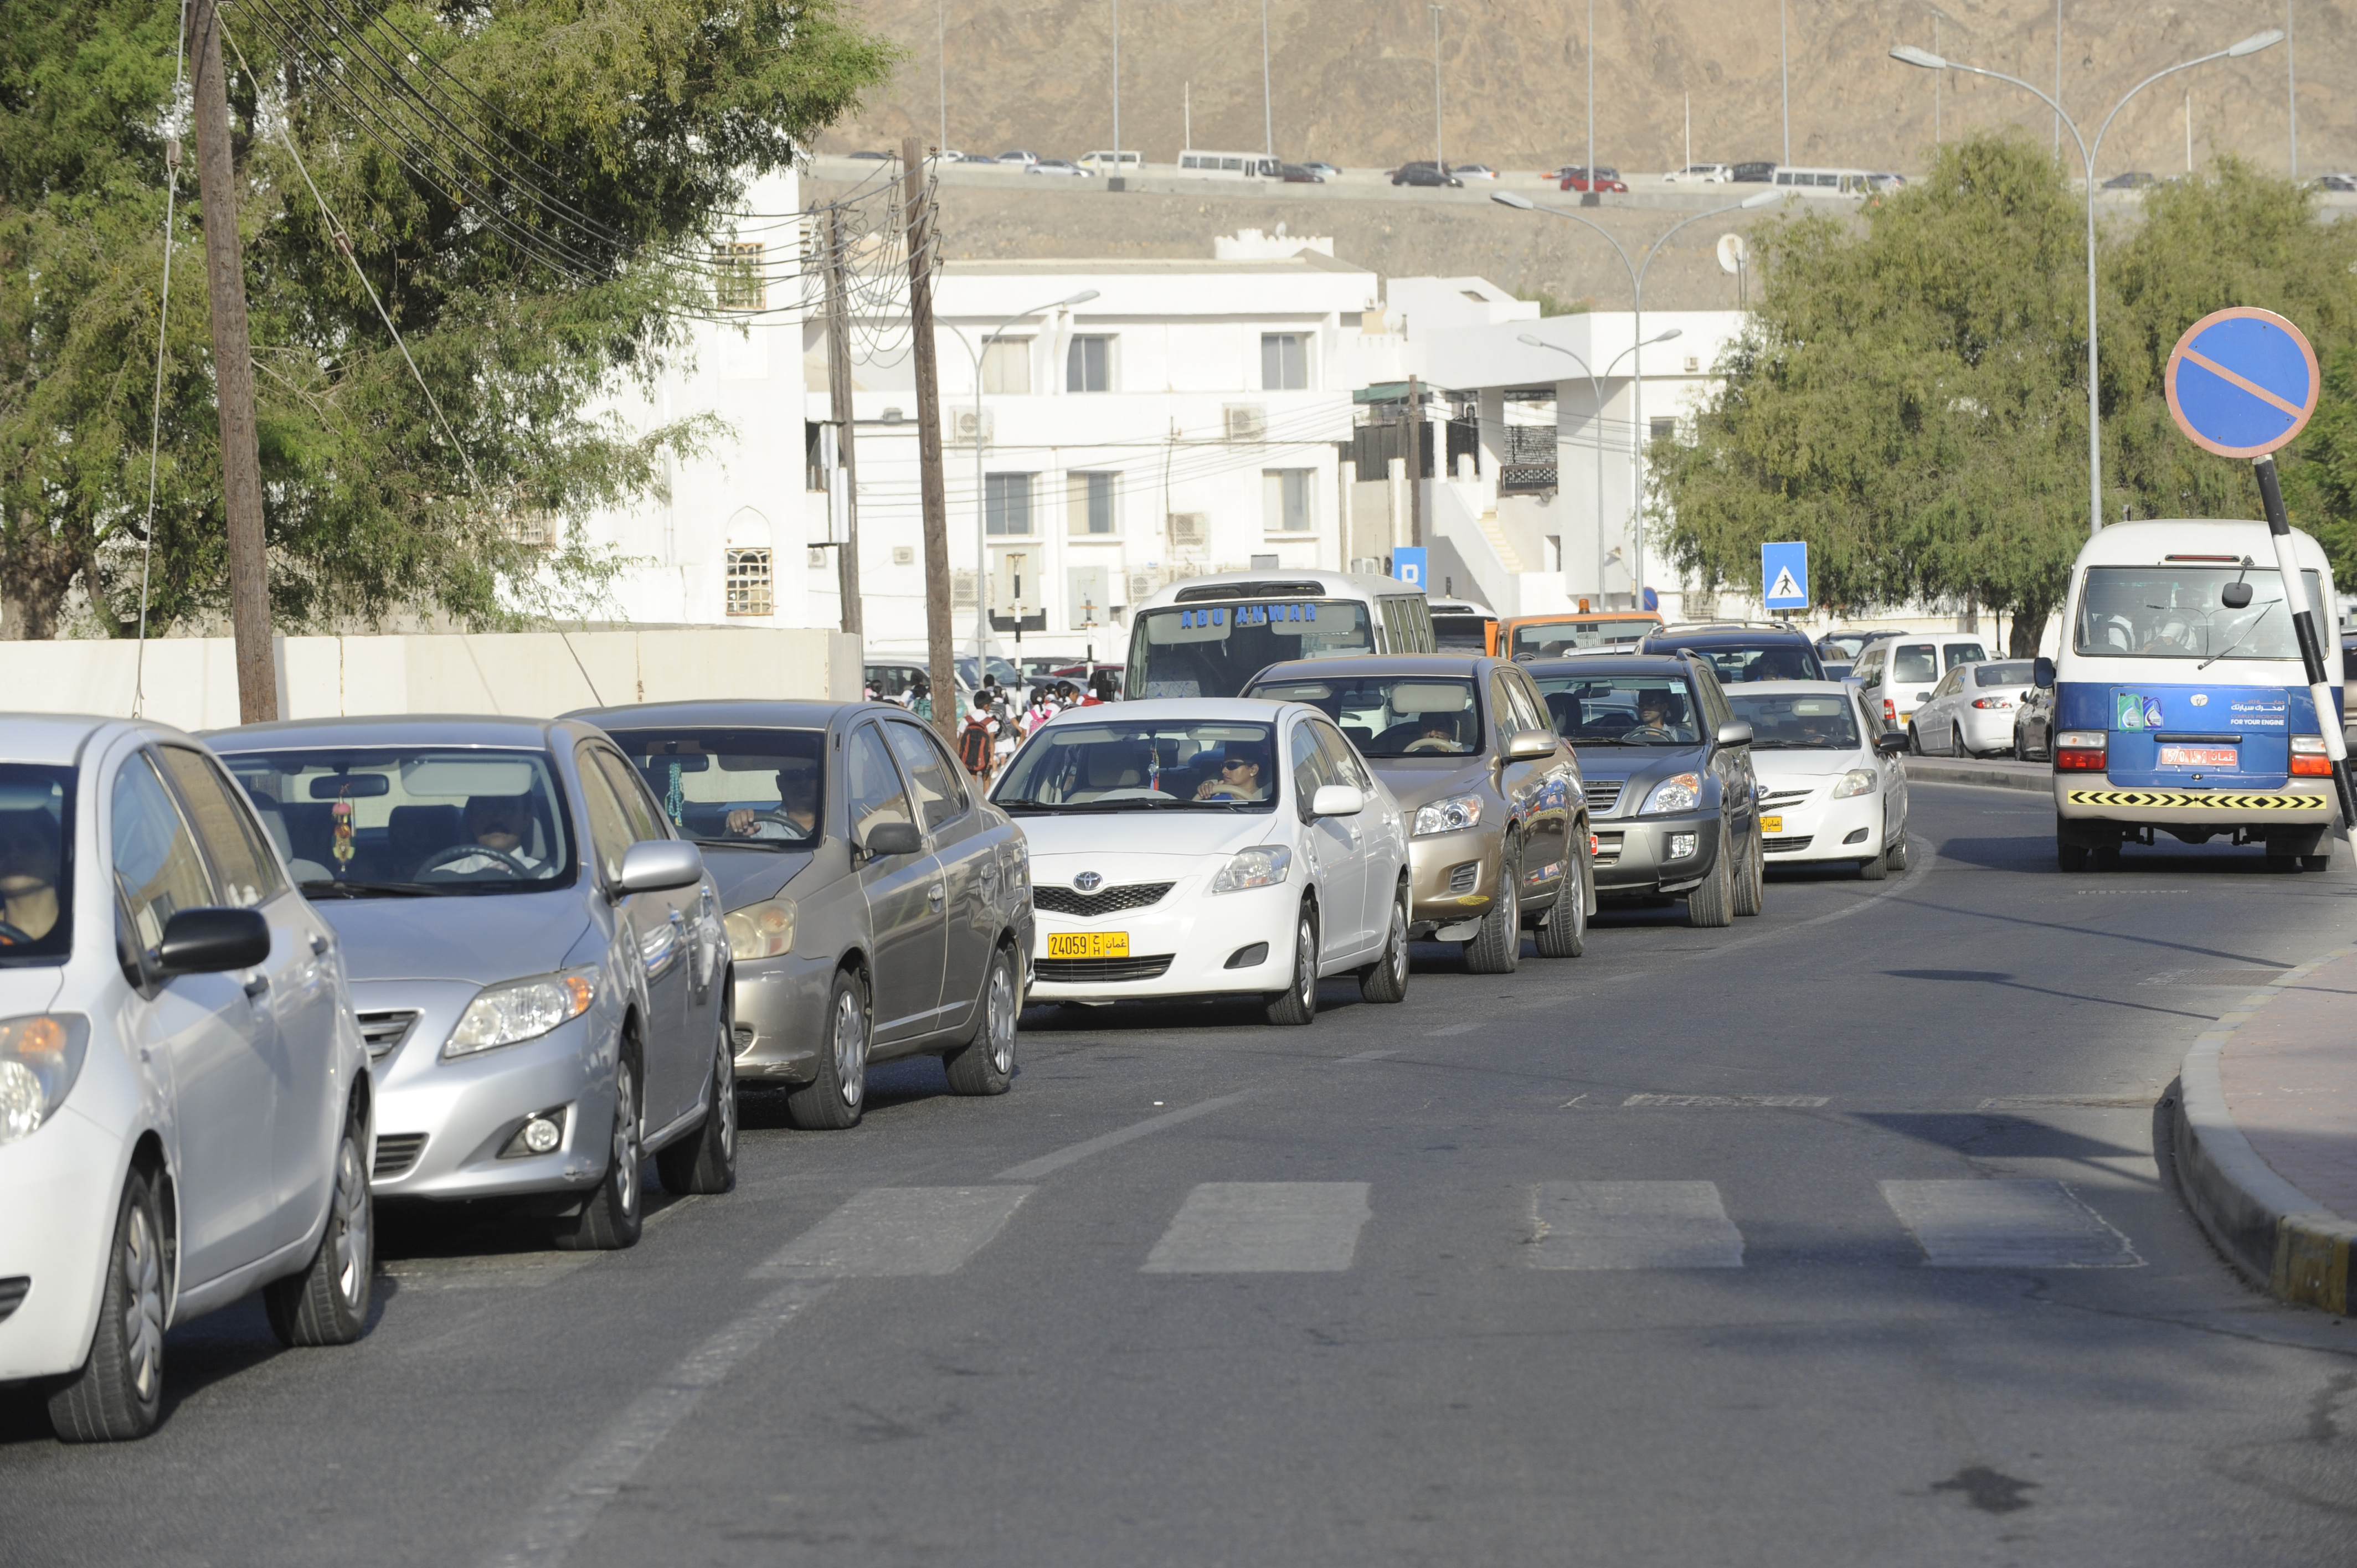 Oman transport: Public network only solution to traffic jams in Muscat